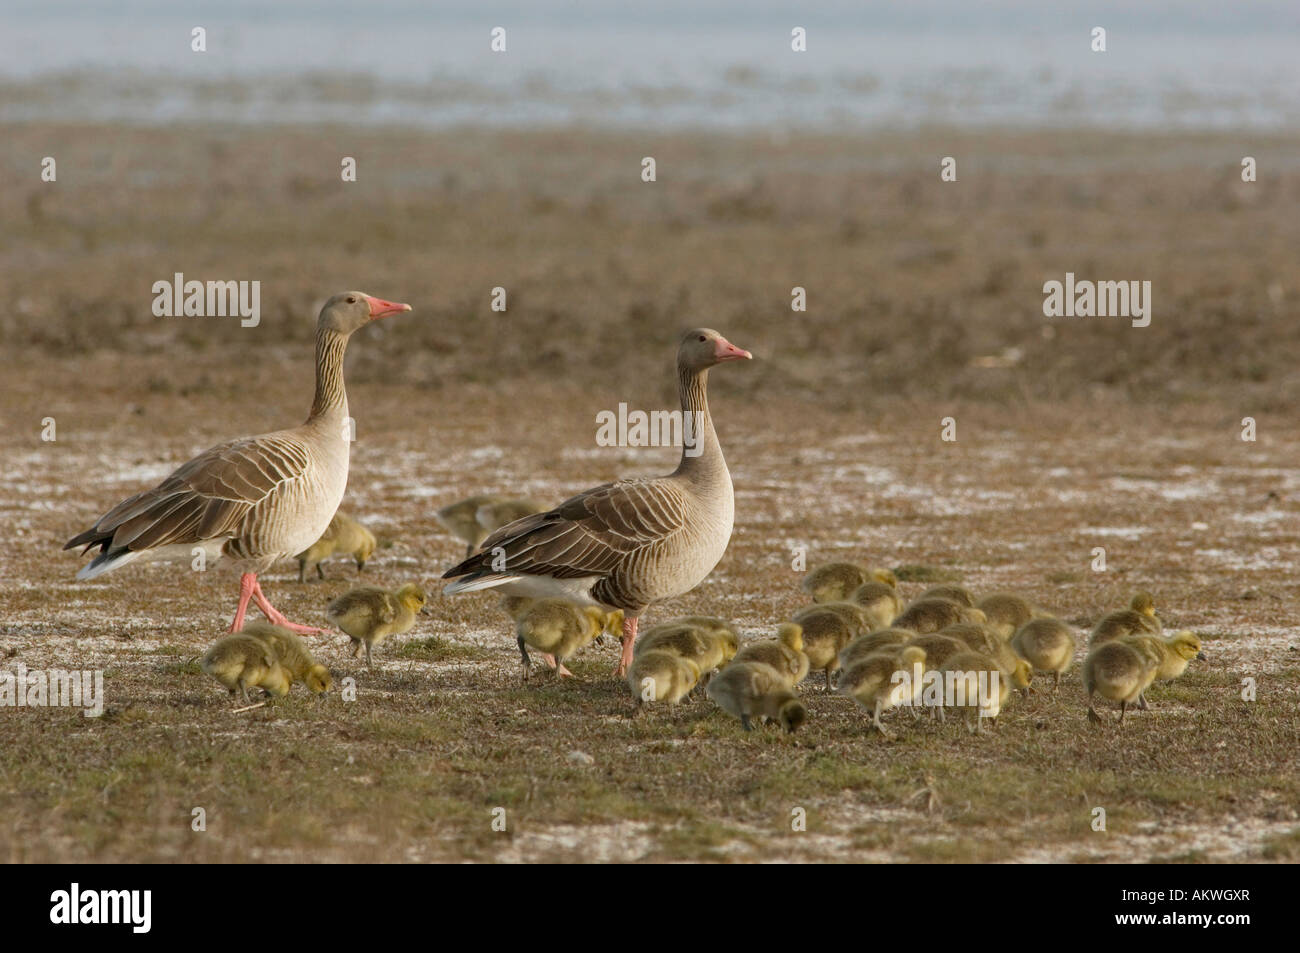 Grey geese with poults, close-up Stock Photo